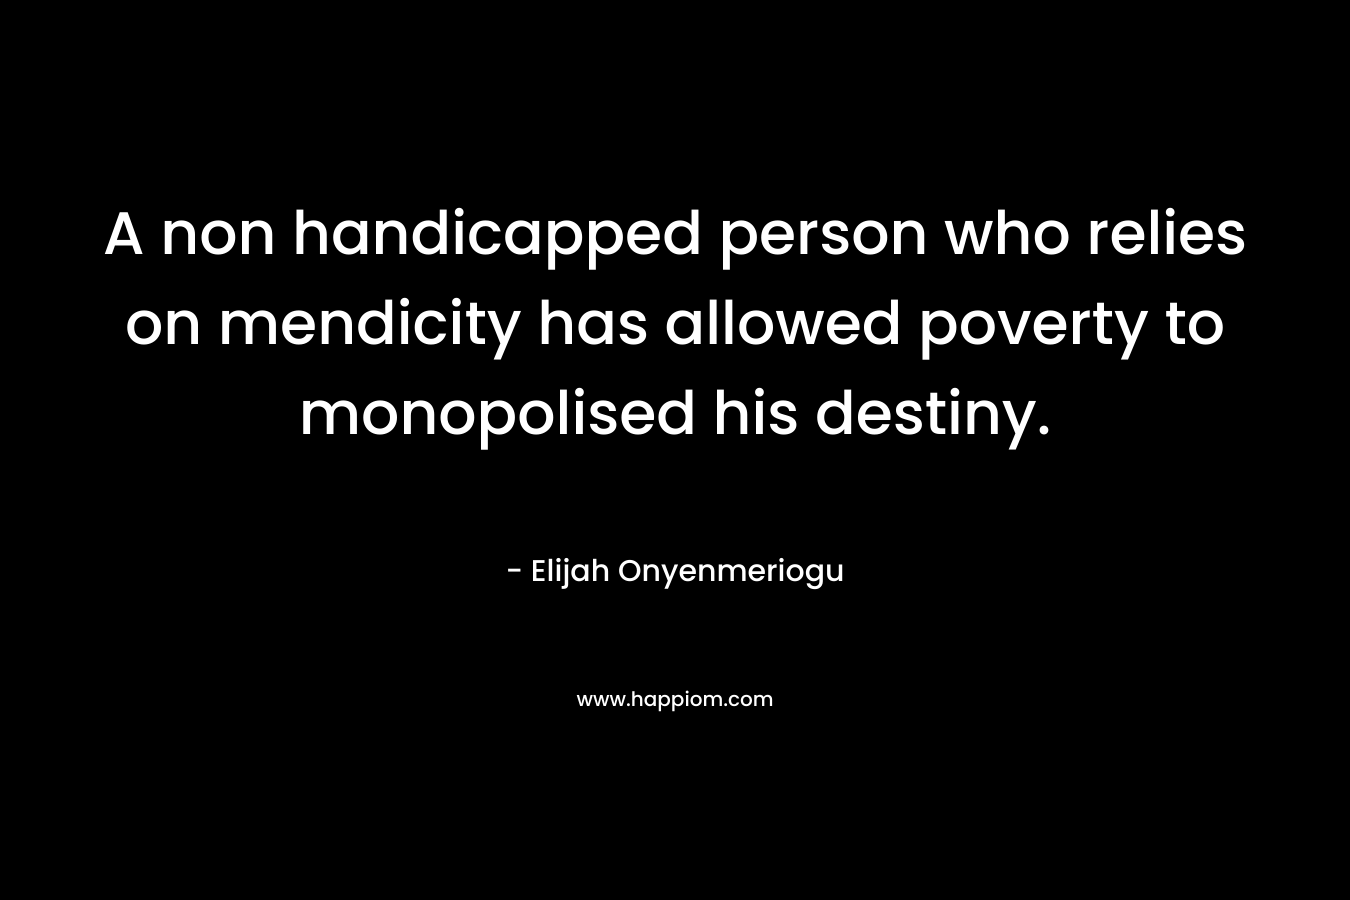 A non handicapped person who relies on mendicity has allowed poverty to monopolised his destiny. – Elijah Onyenmeriogu